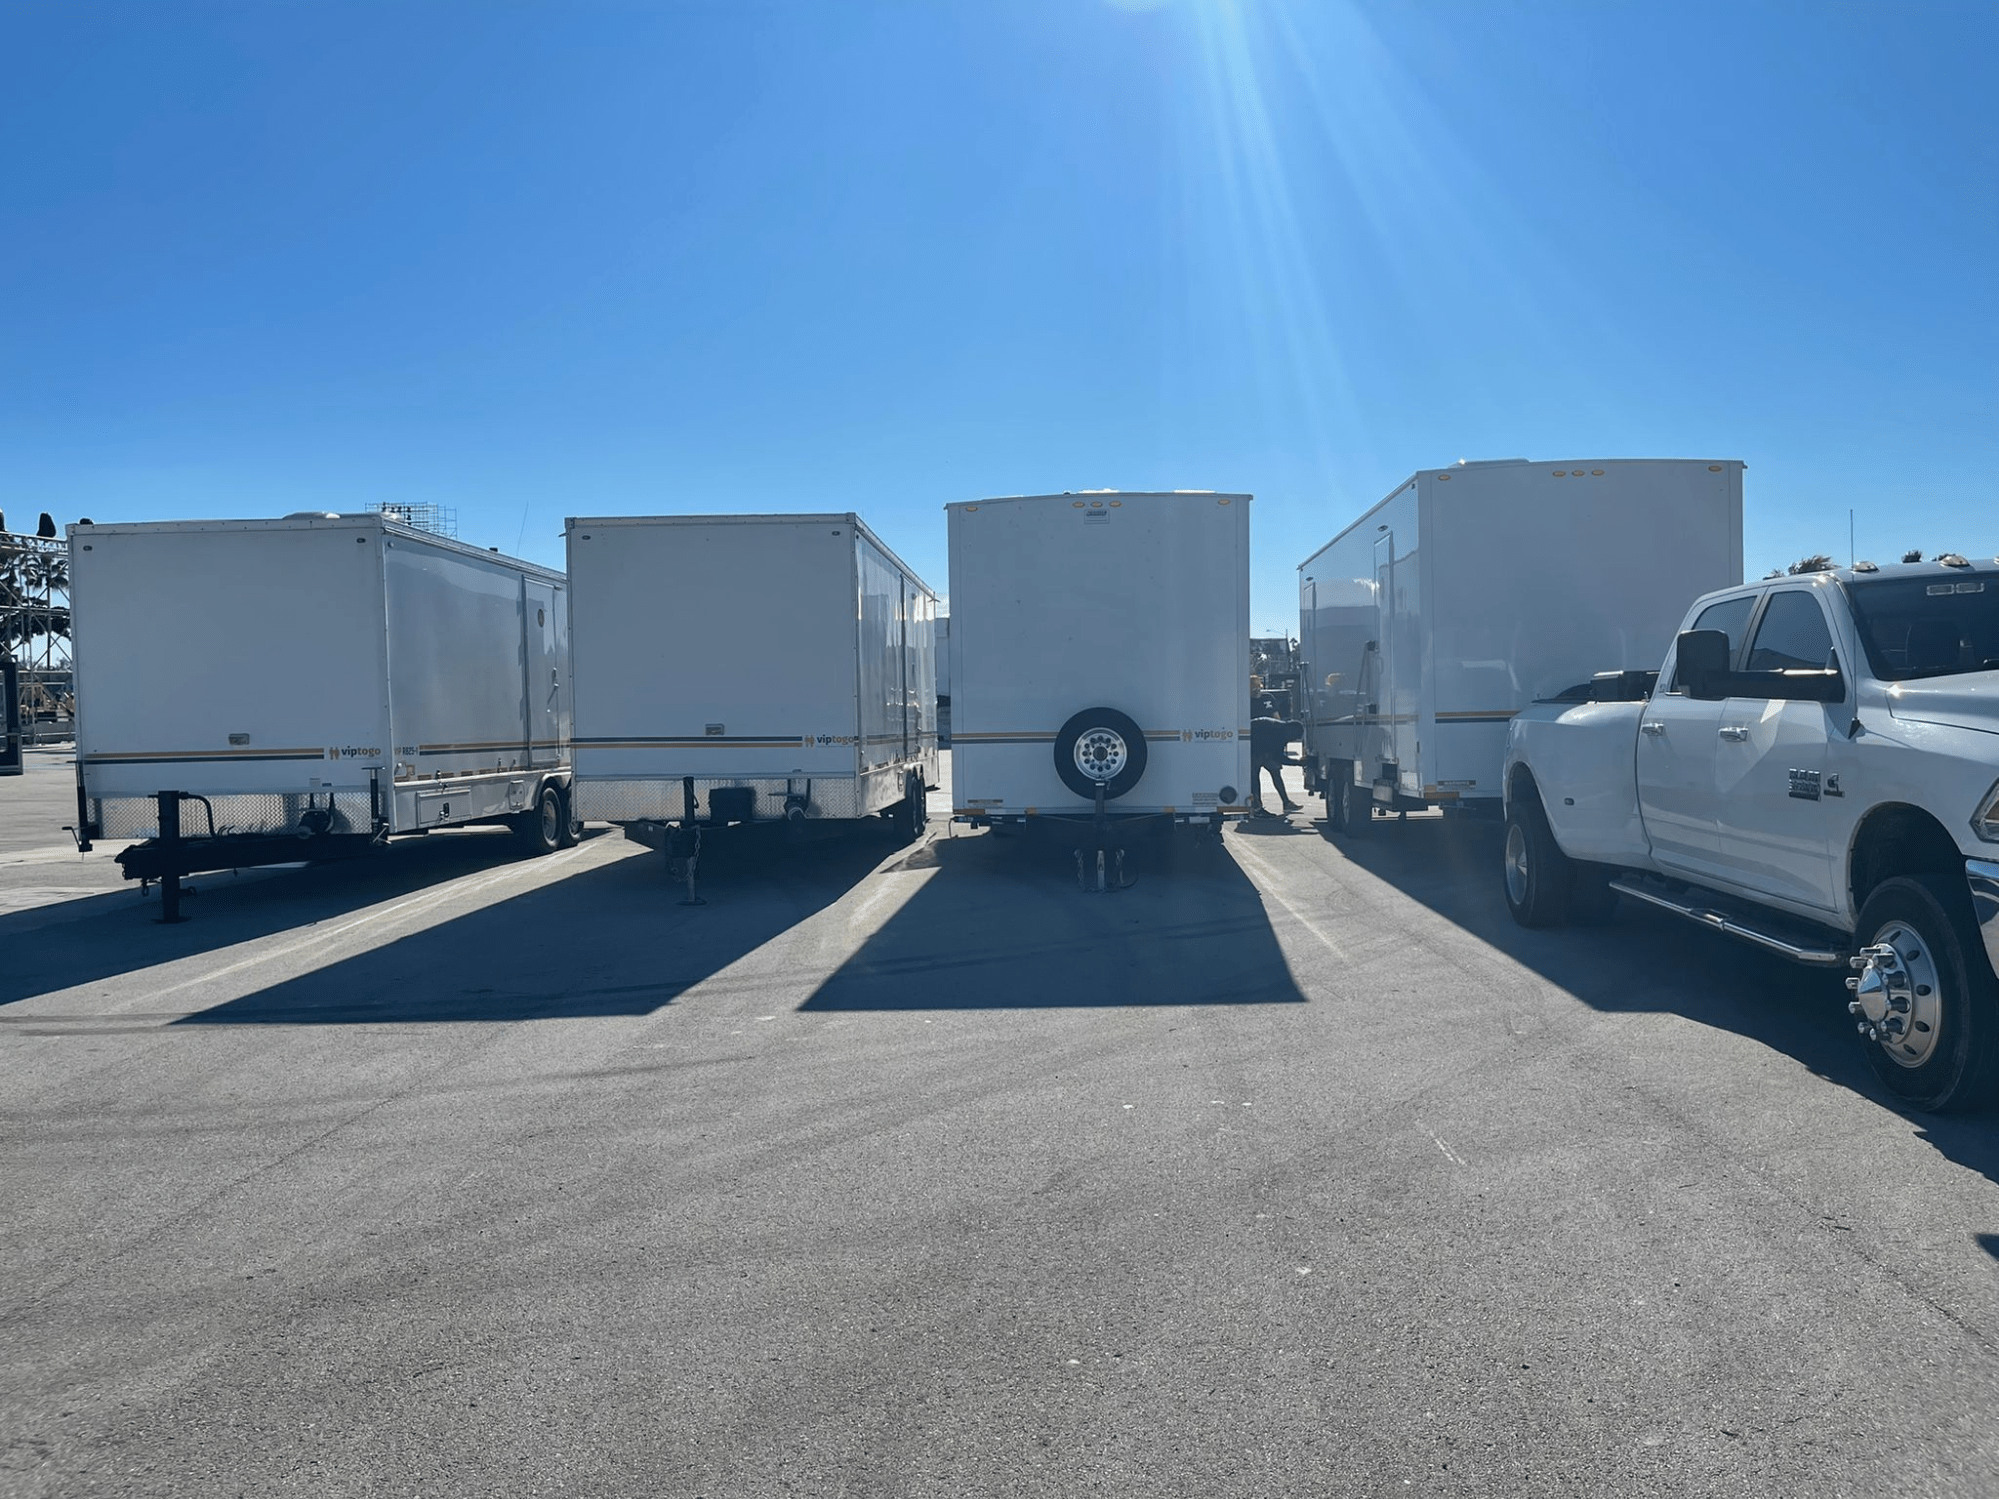 Luxury portable restrooms at an event